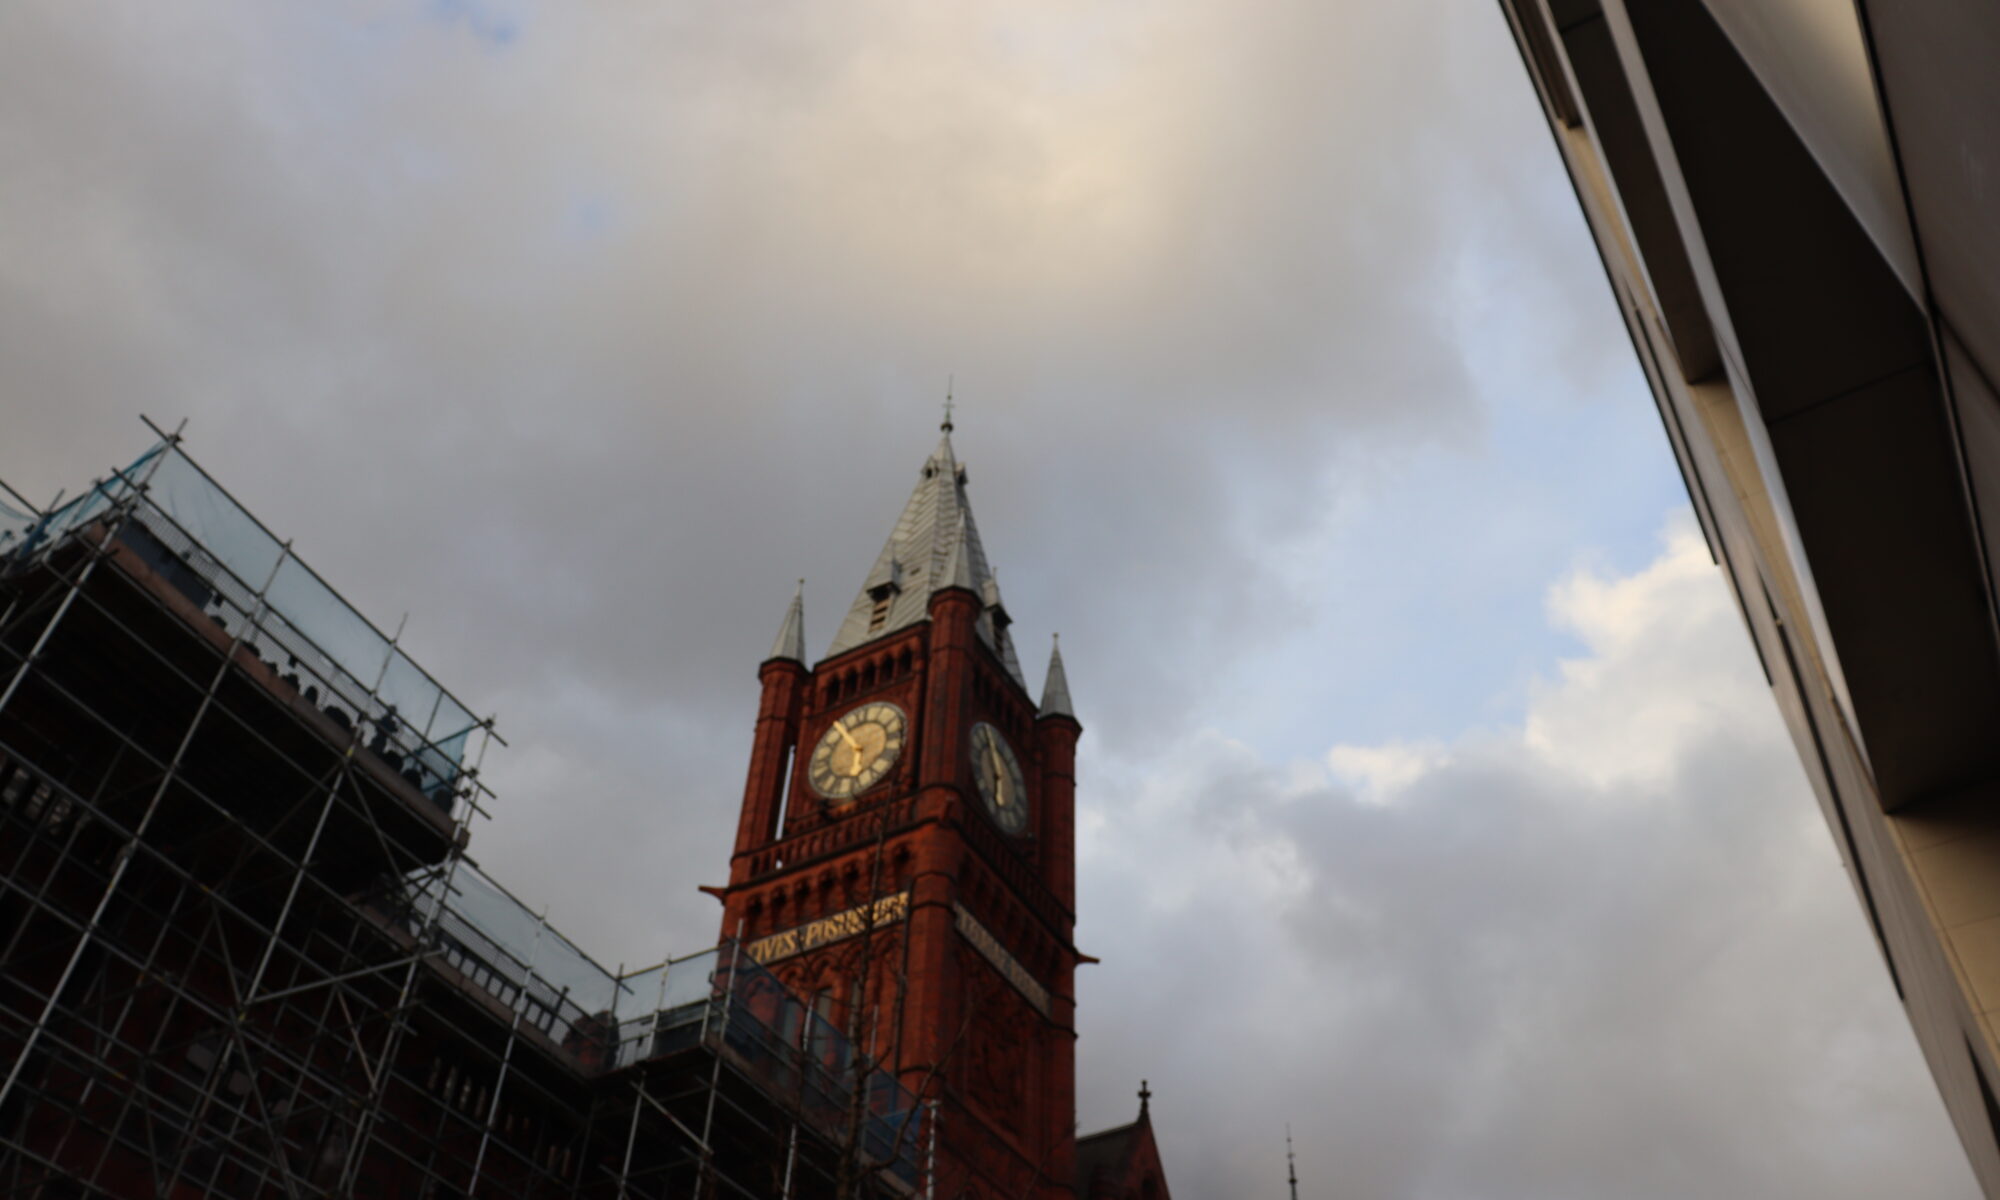 Image showing red-brick clock tower symbolic of the University of Liverpool